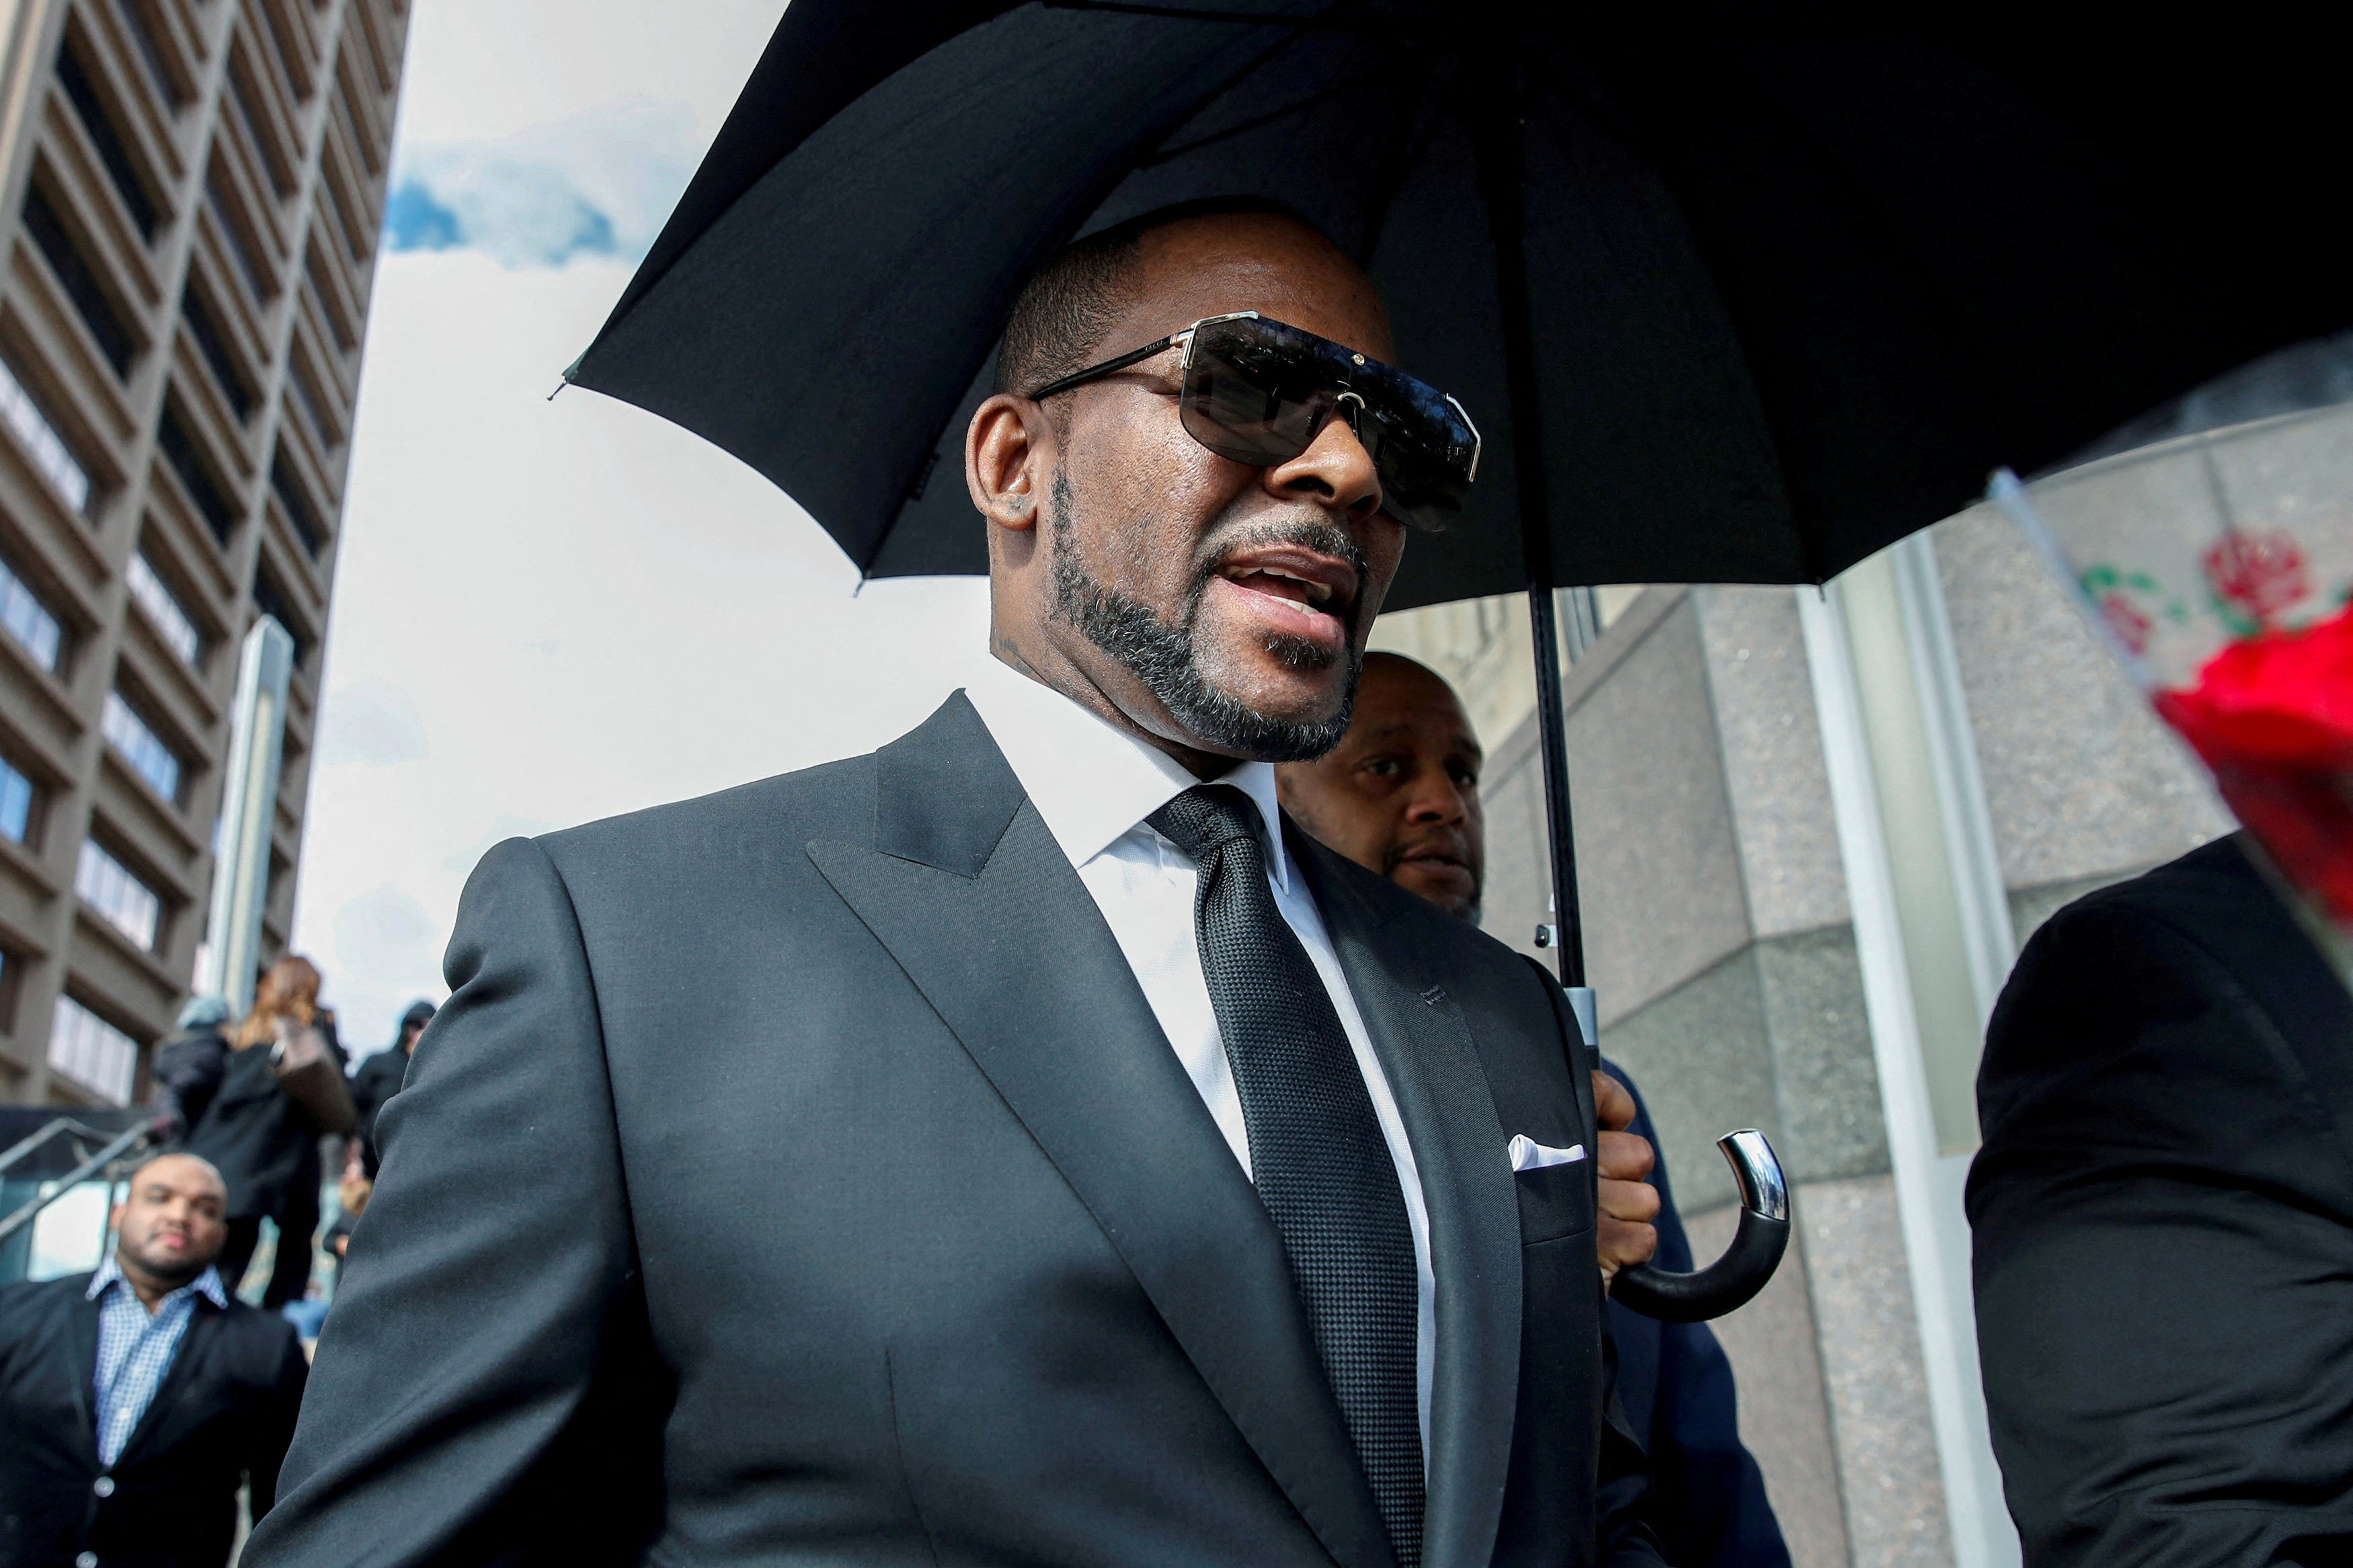 R. Kelly wearing a suit and sunglasses and walking under an umbrella